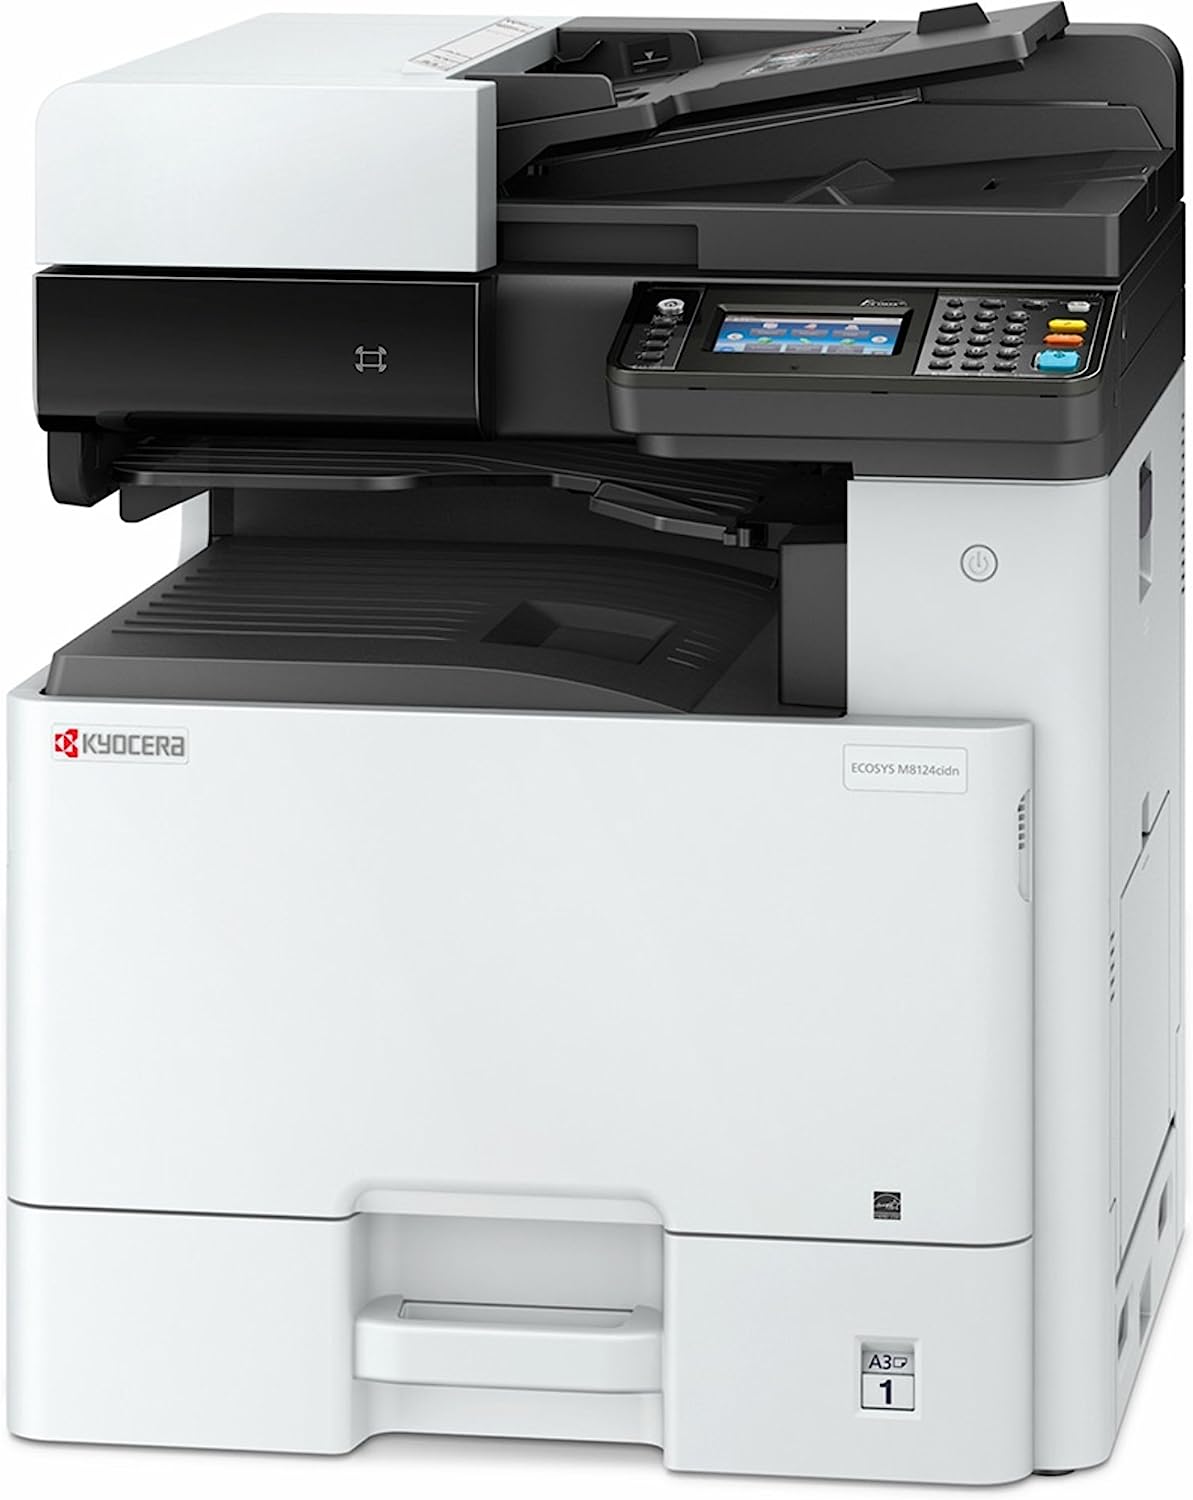 best a3 printer for small business